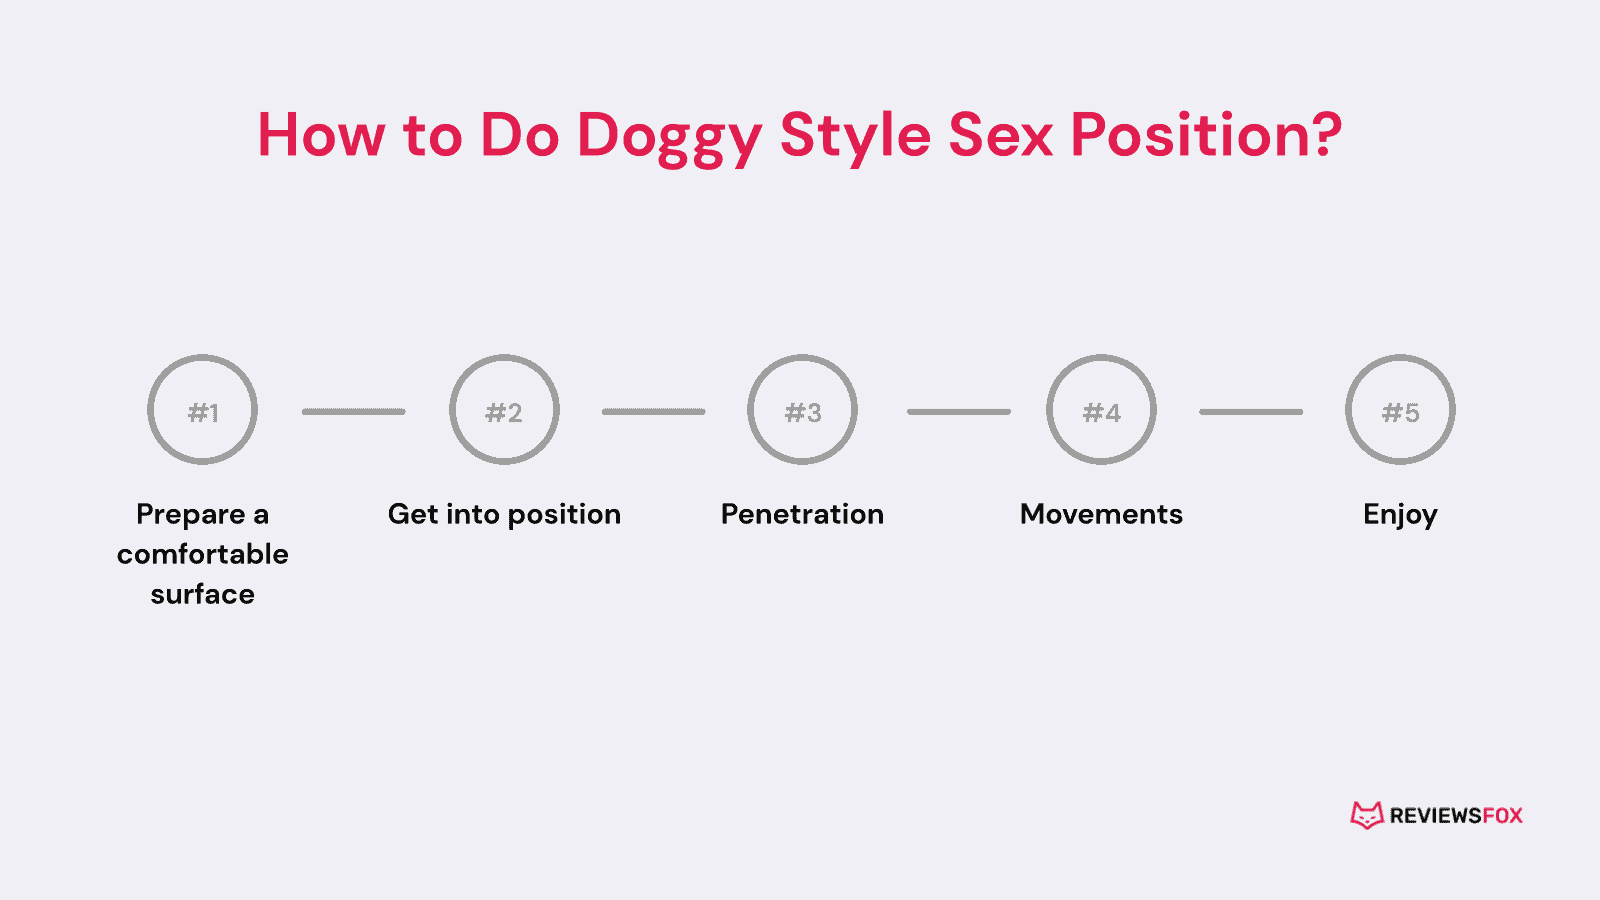 How to do Doggy Style sex position